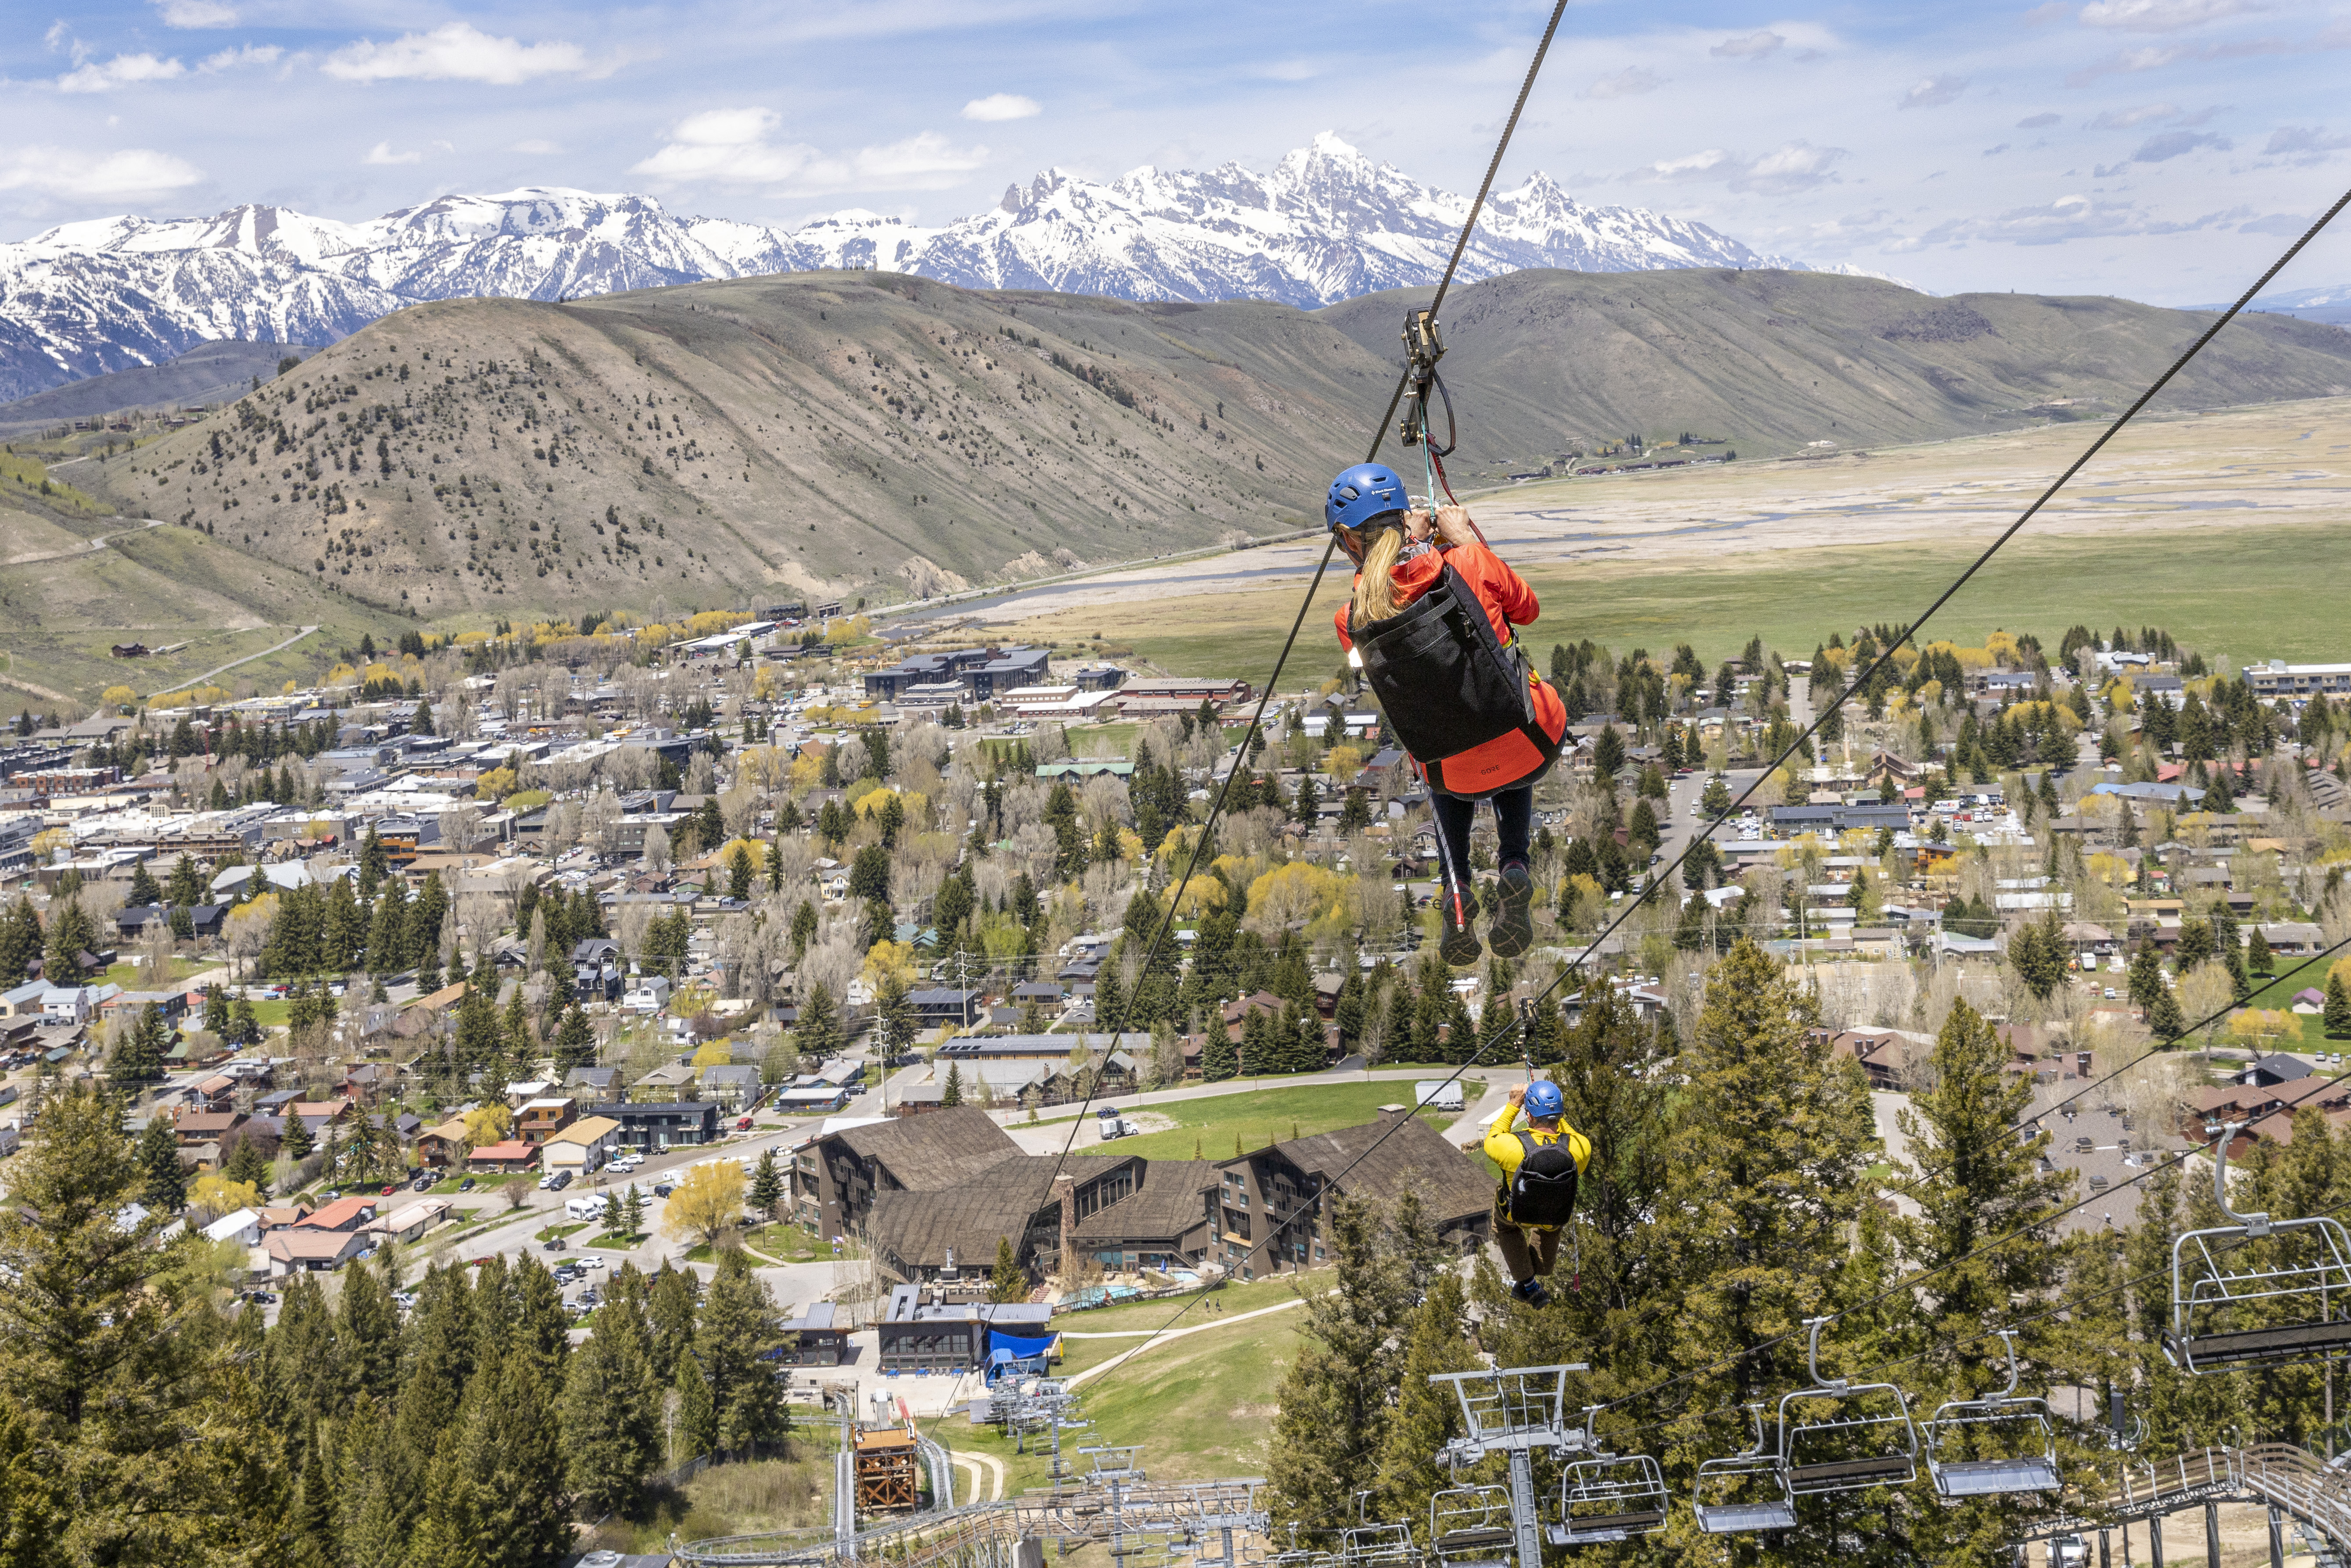 A woman and man descend a mountain on a zipline towards a town with mountains in the distance in Jackson Hole, WY